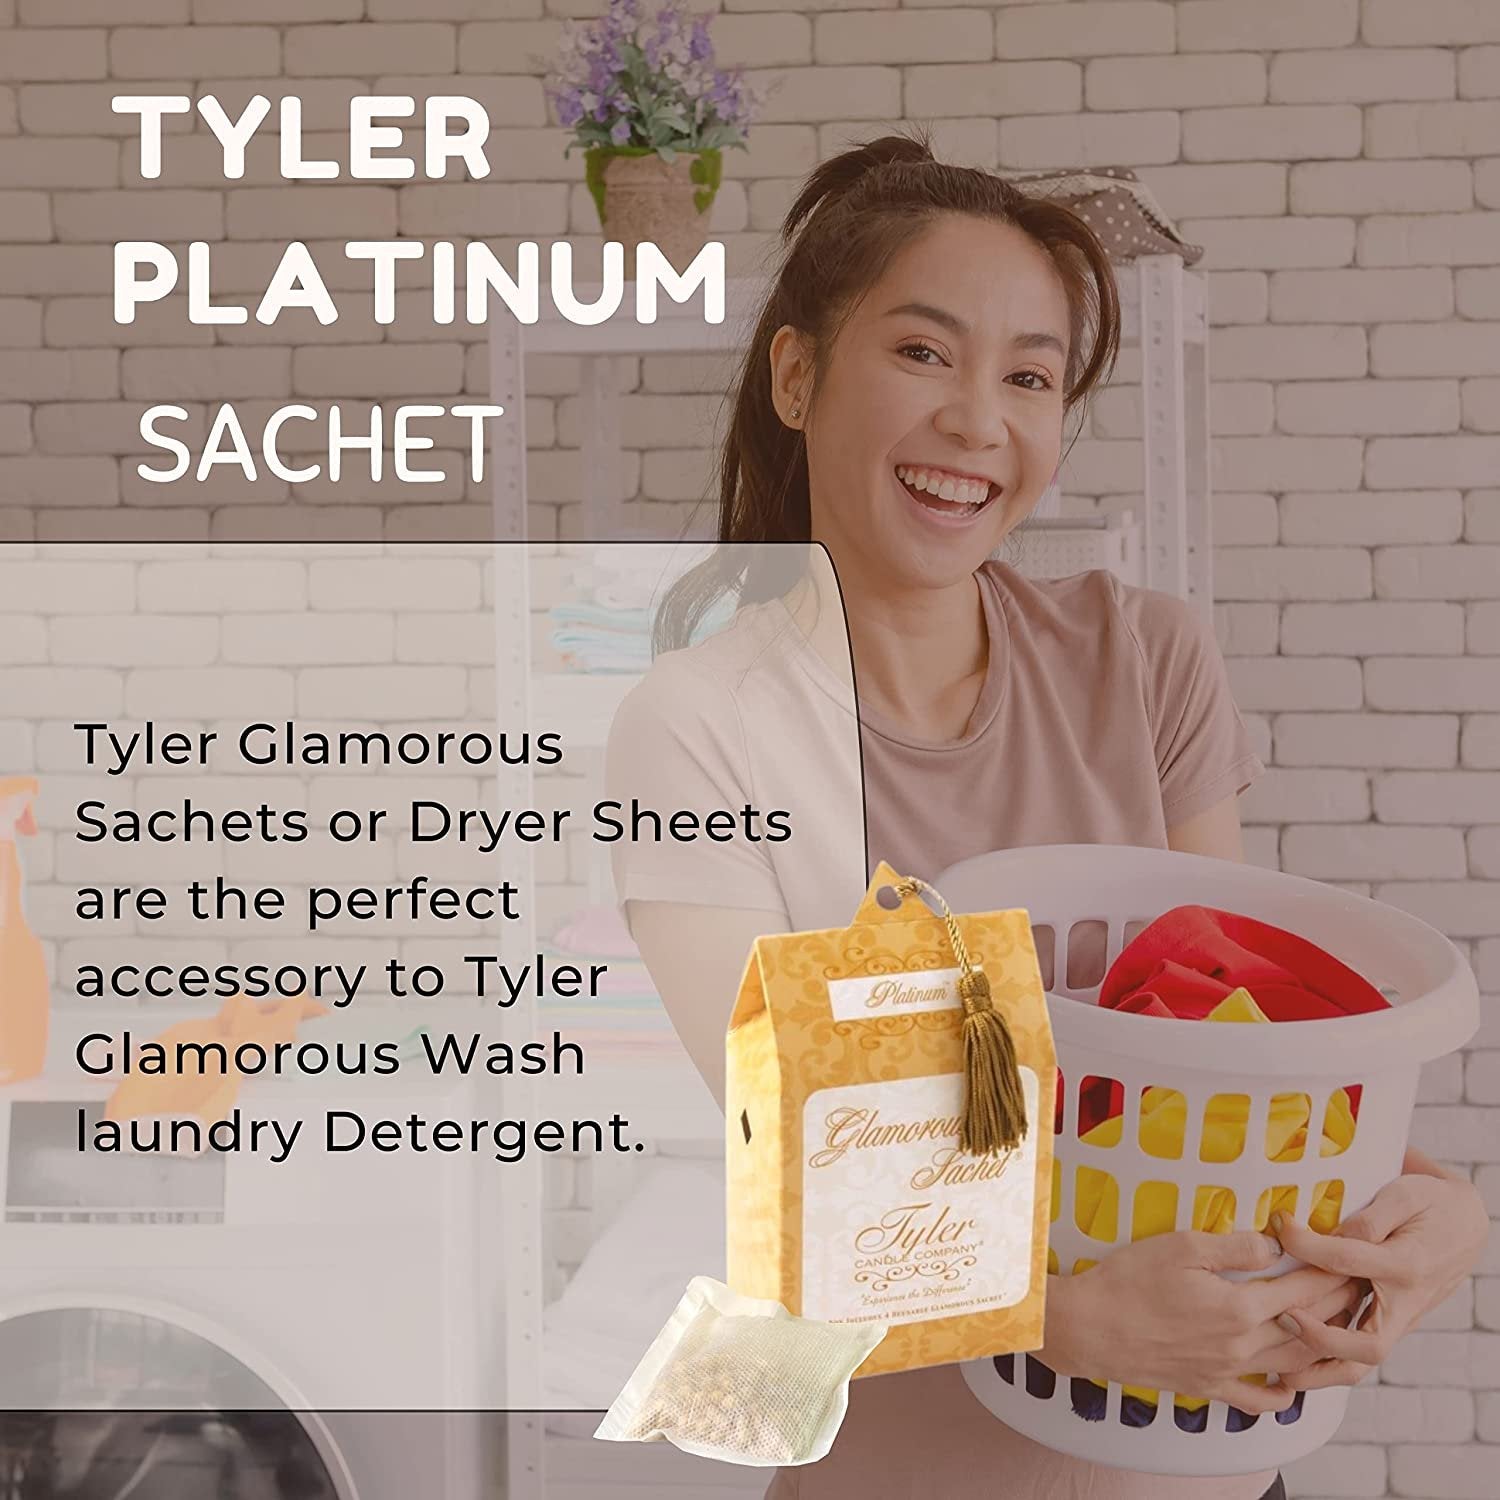 Tyler Candle Company Platinum Dryer Sheet Sachets - Glamorous Reusable Dryer Sheets - Sachets for Drawers and Closets - 1 Pack, 4 Sachets, Dryer, Home, or Personal Sachet, with Bonus Key Chain